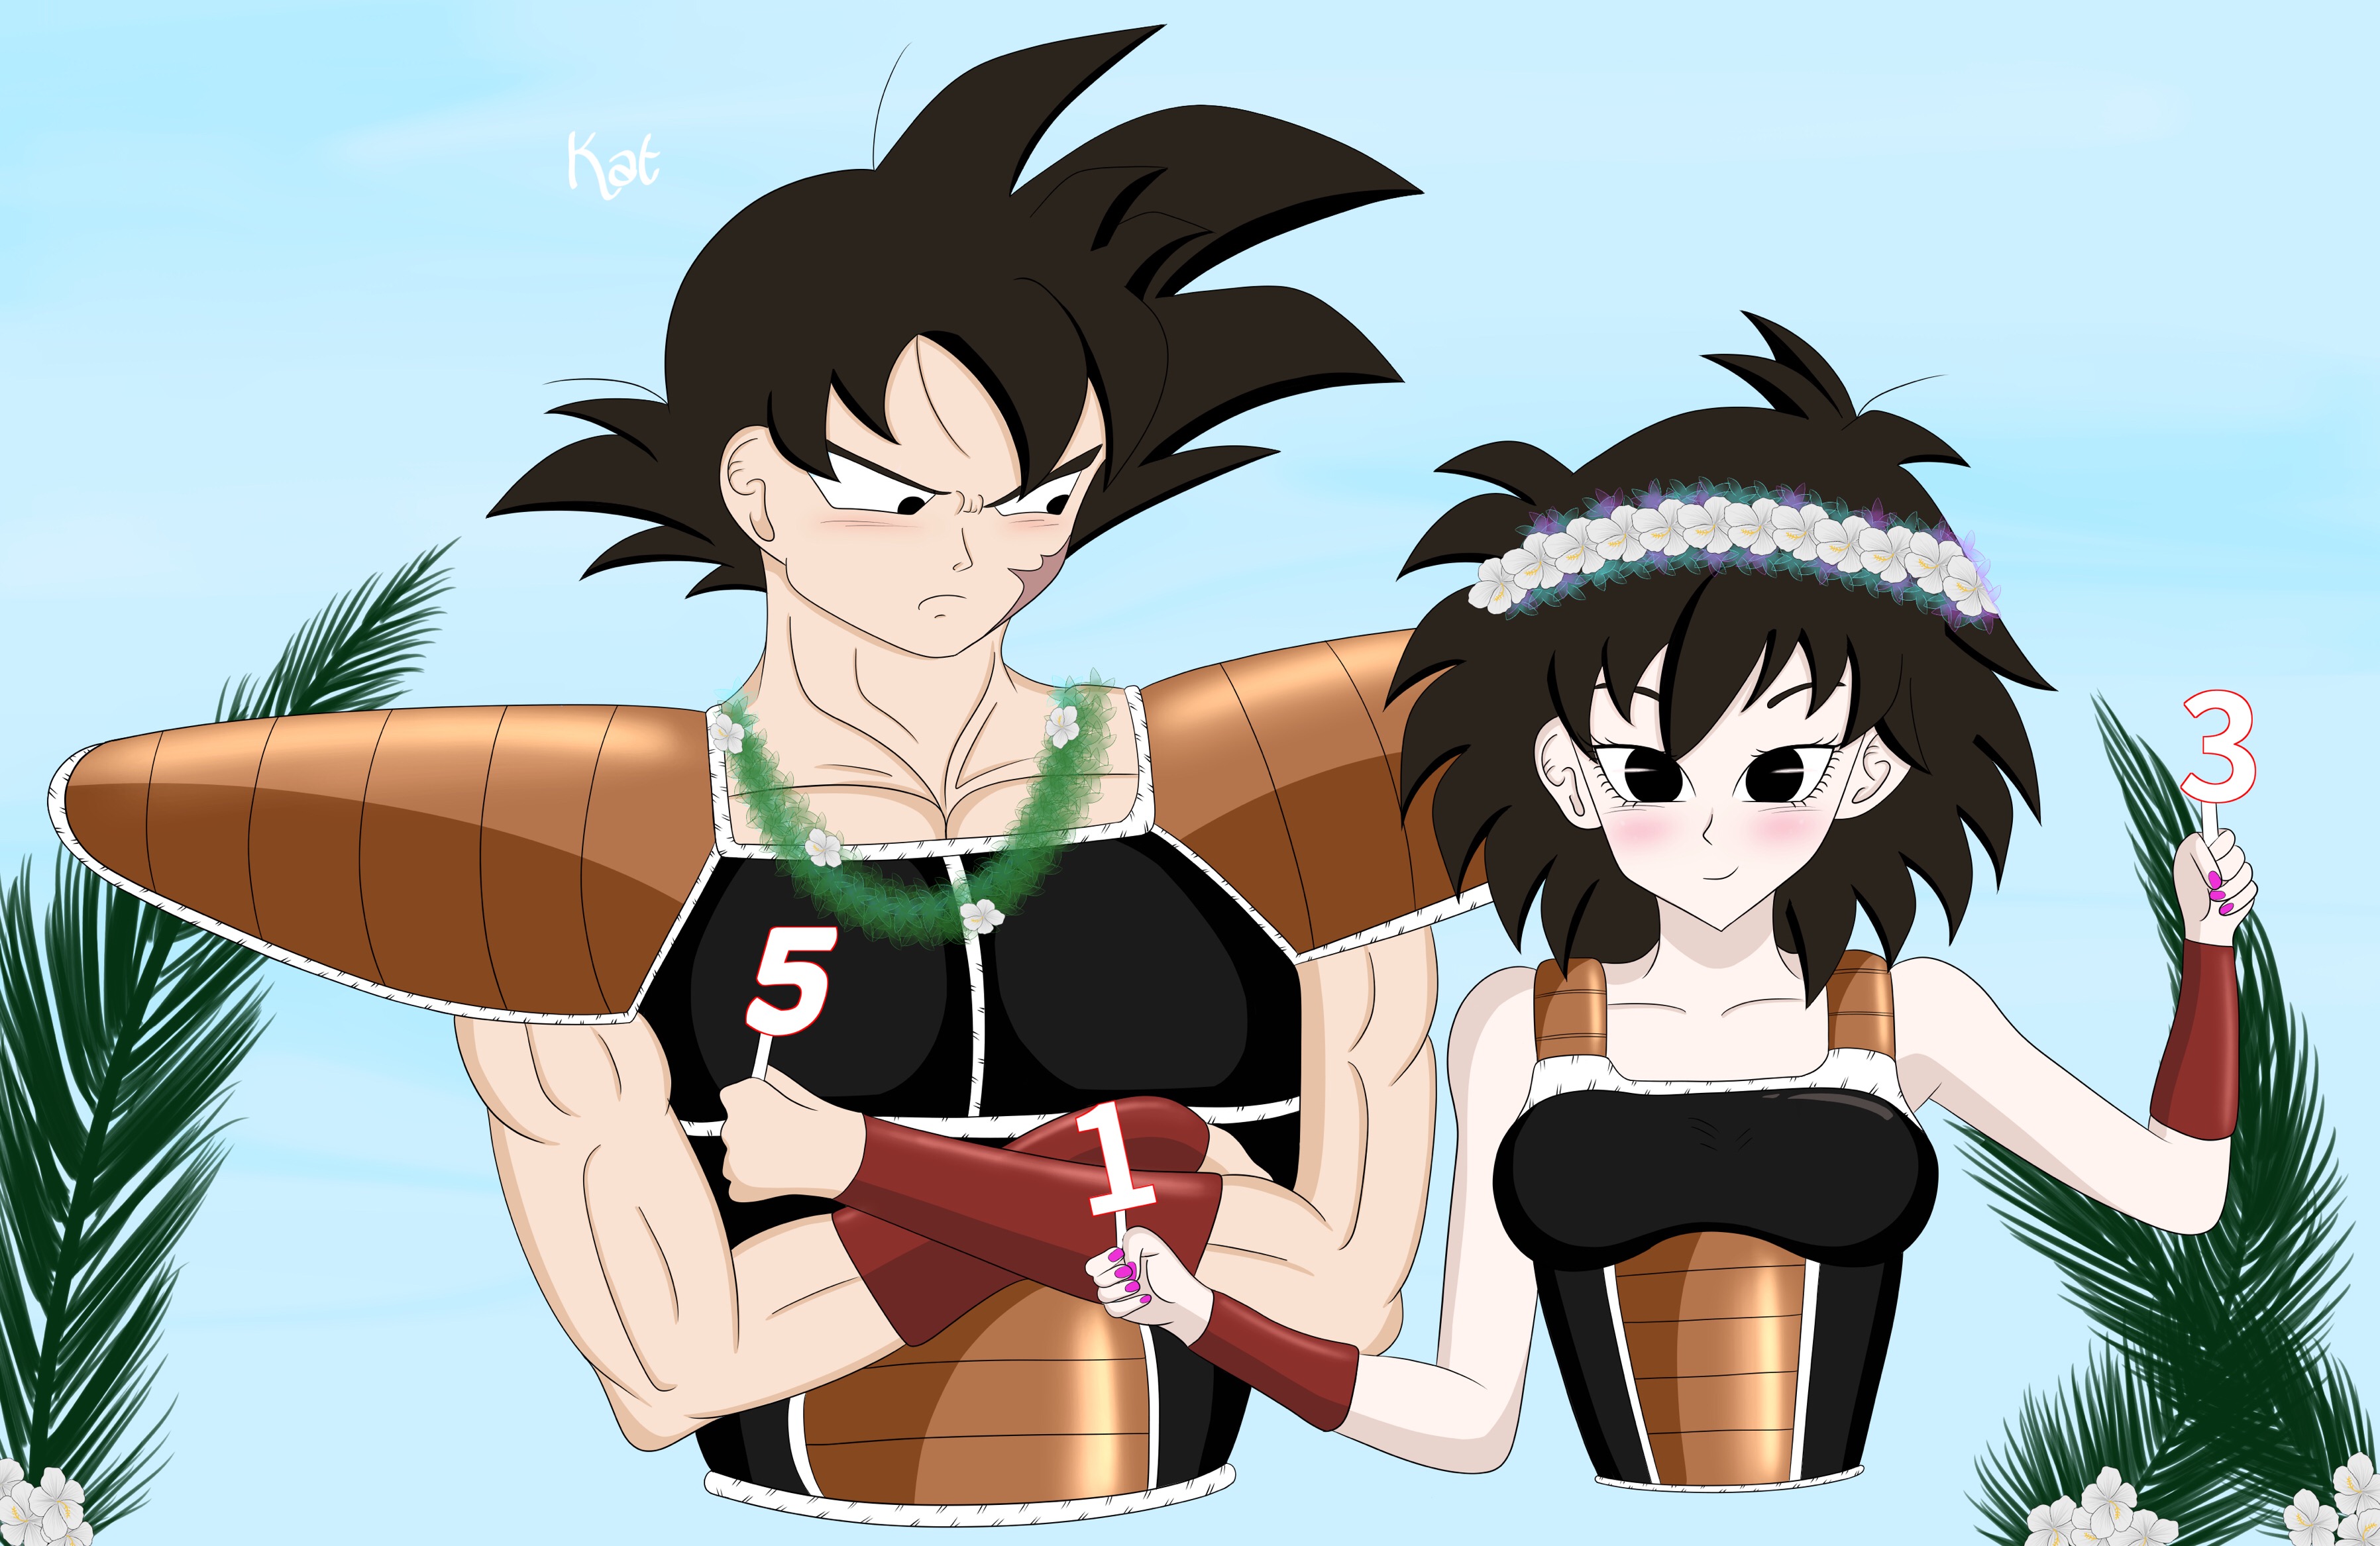 This visual is about bardock gine dragonballz dragonball art #bardock #gine #dragonba...